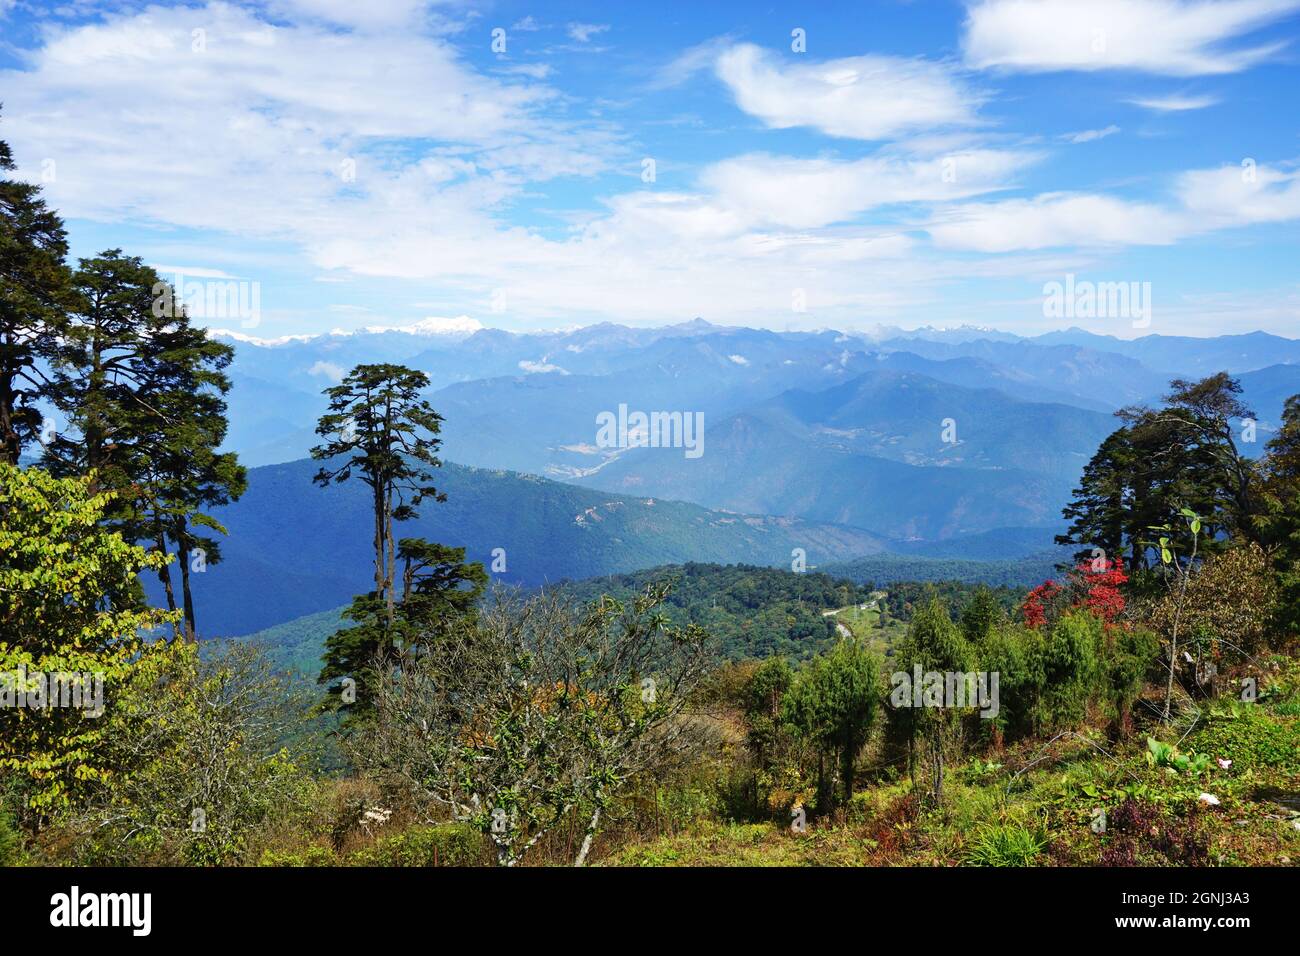 Panoramic view of the Himalaya Mountains from Bhutan’s Dochula Pass, on the road from Thimphu to Punakha. Elevation: 3,100 meters (10,200 feet). Stock Photo